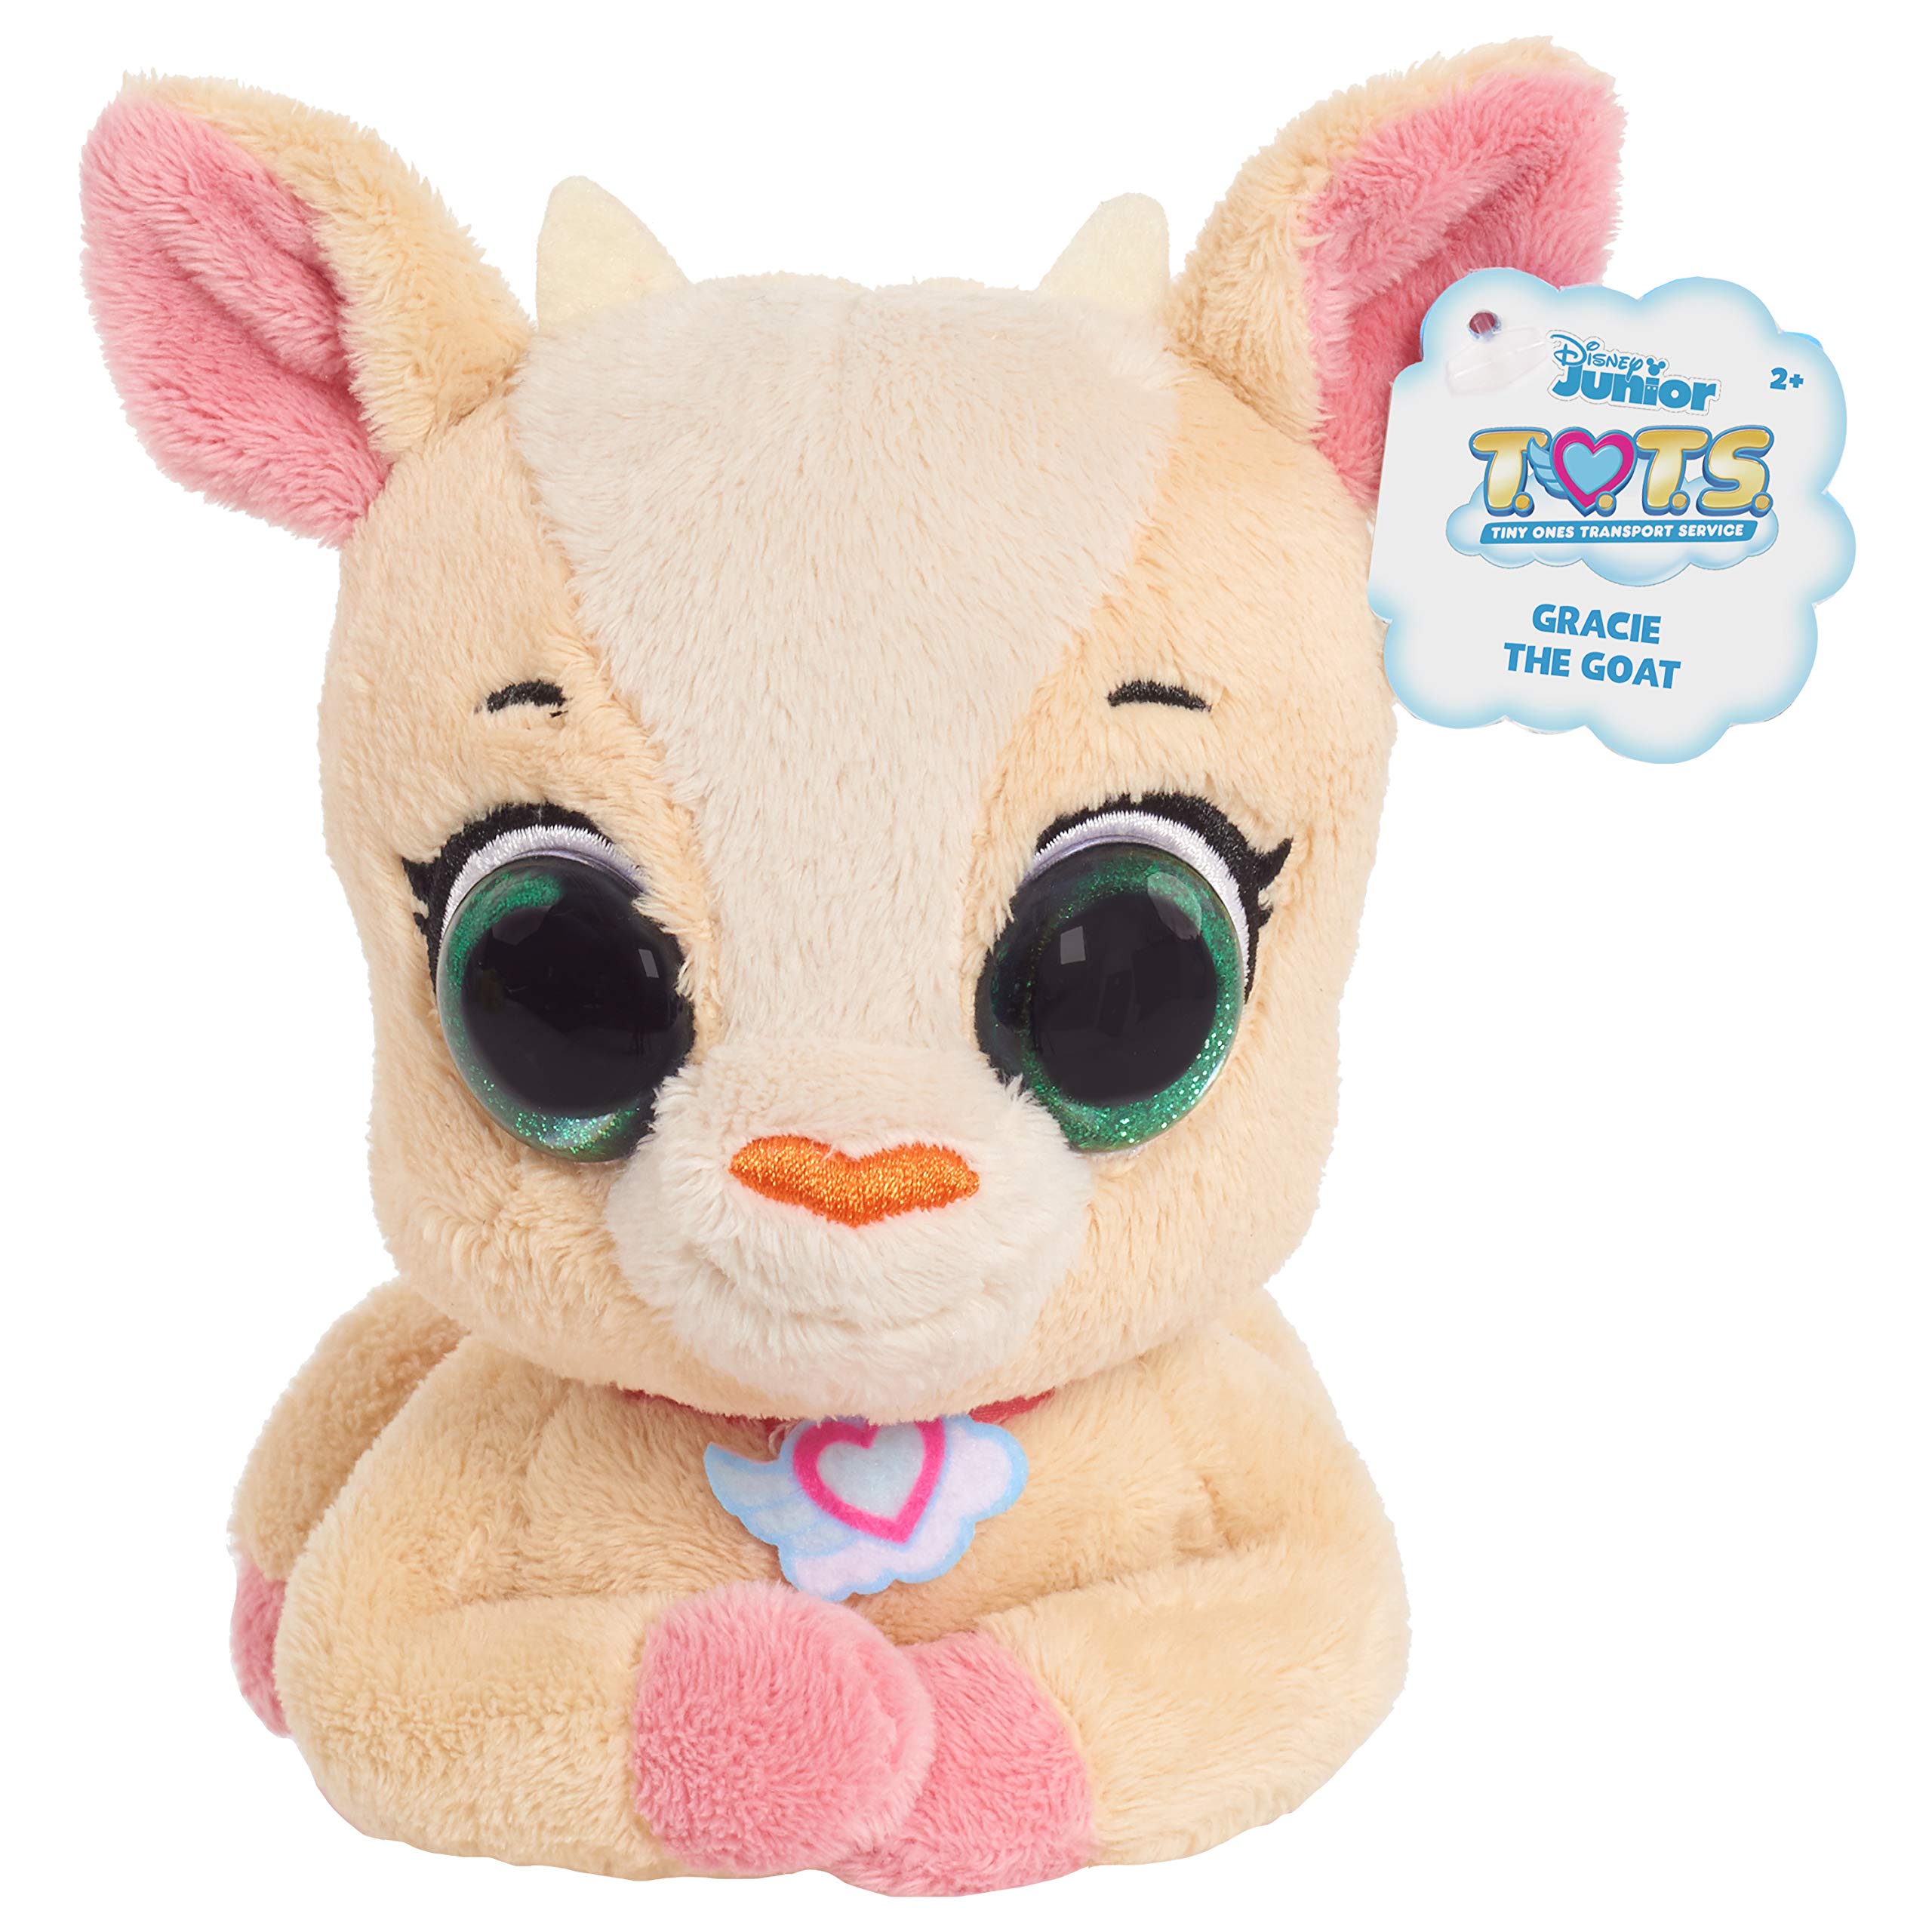 6" Just Play Disney Junior T.O.T.S  Gracie The Goat Bean Plush $3.69 + Free Shipping w/ Prime or on $35+